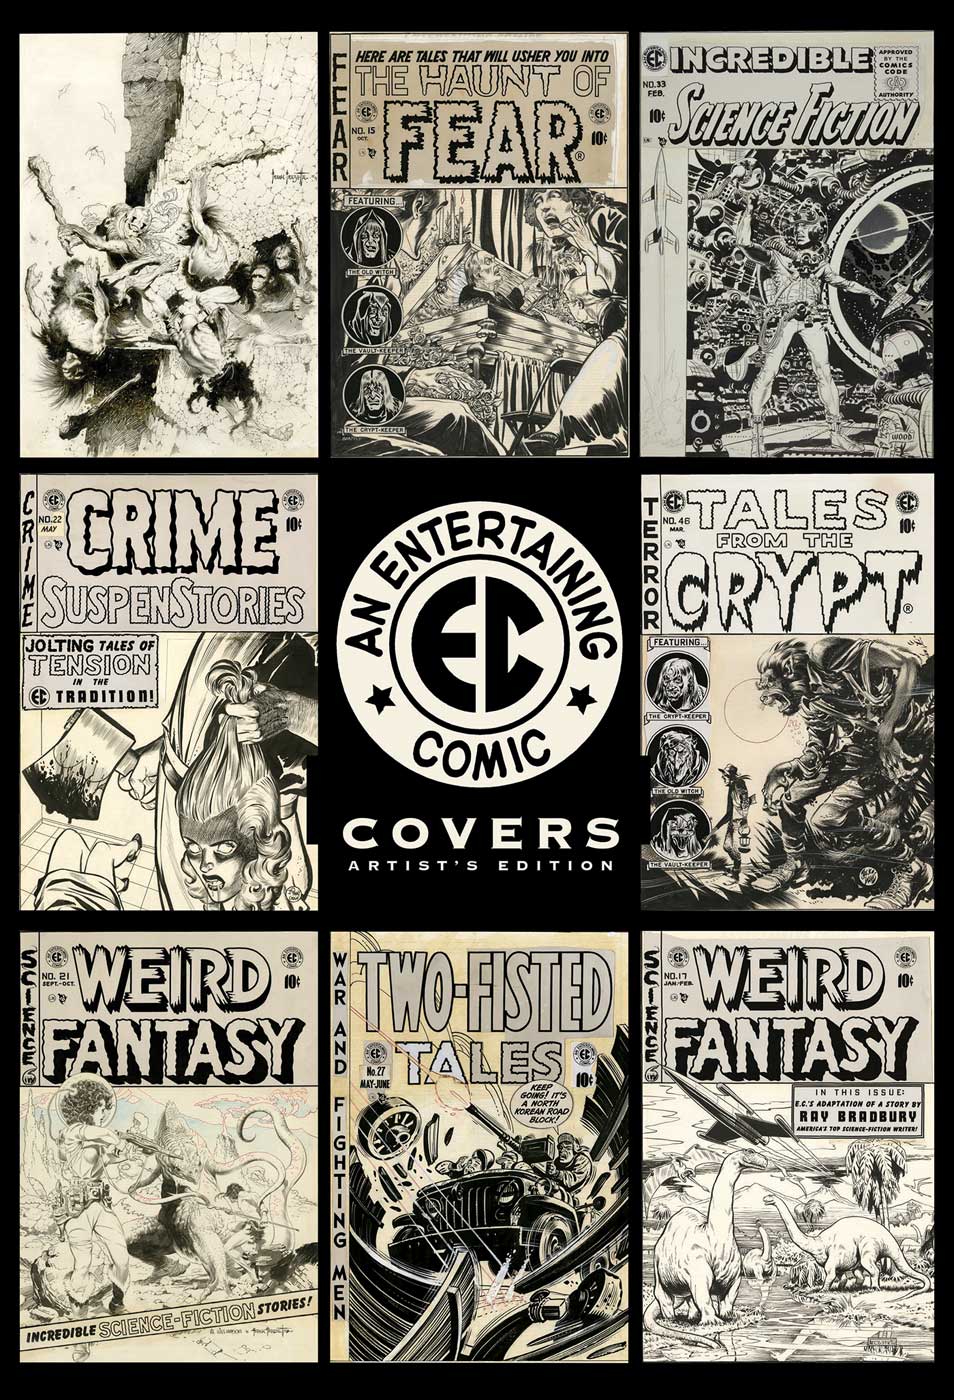 EC Covers: Artist’s Edition